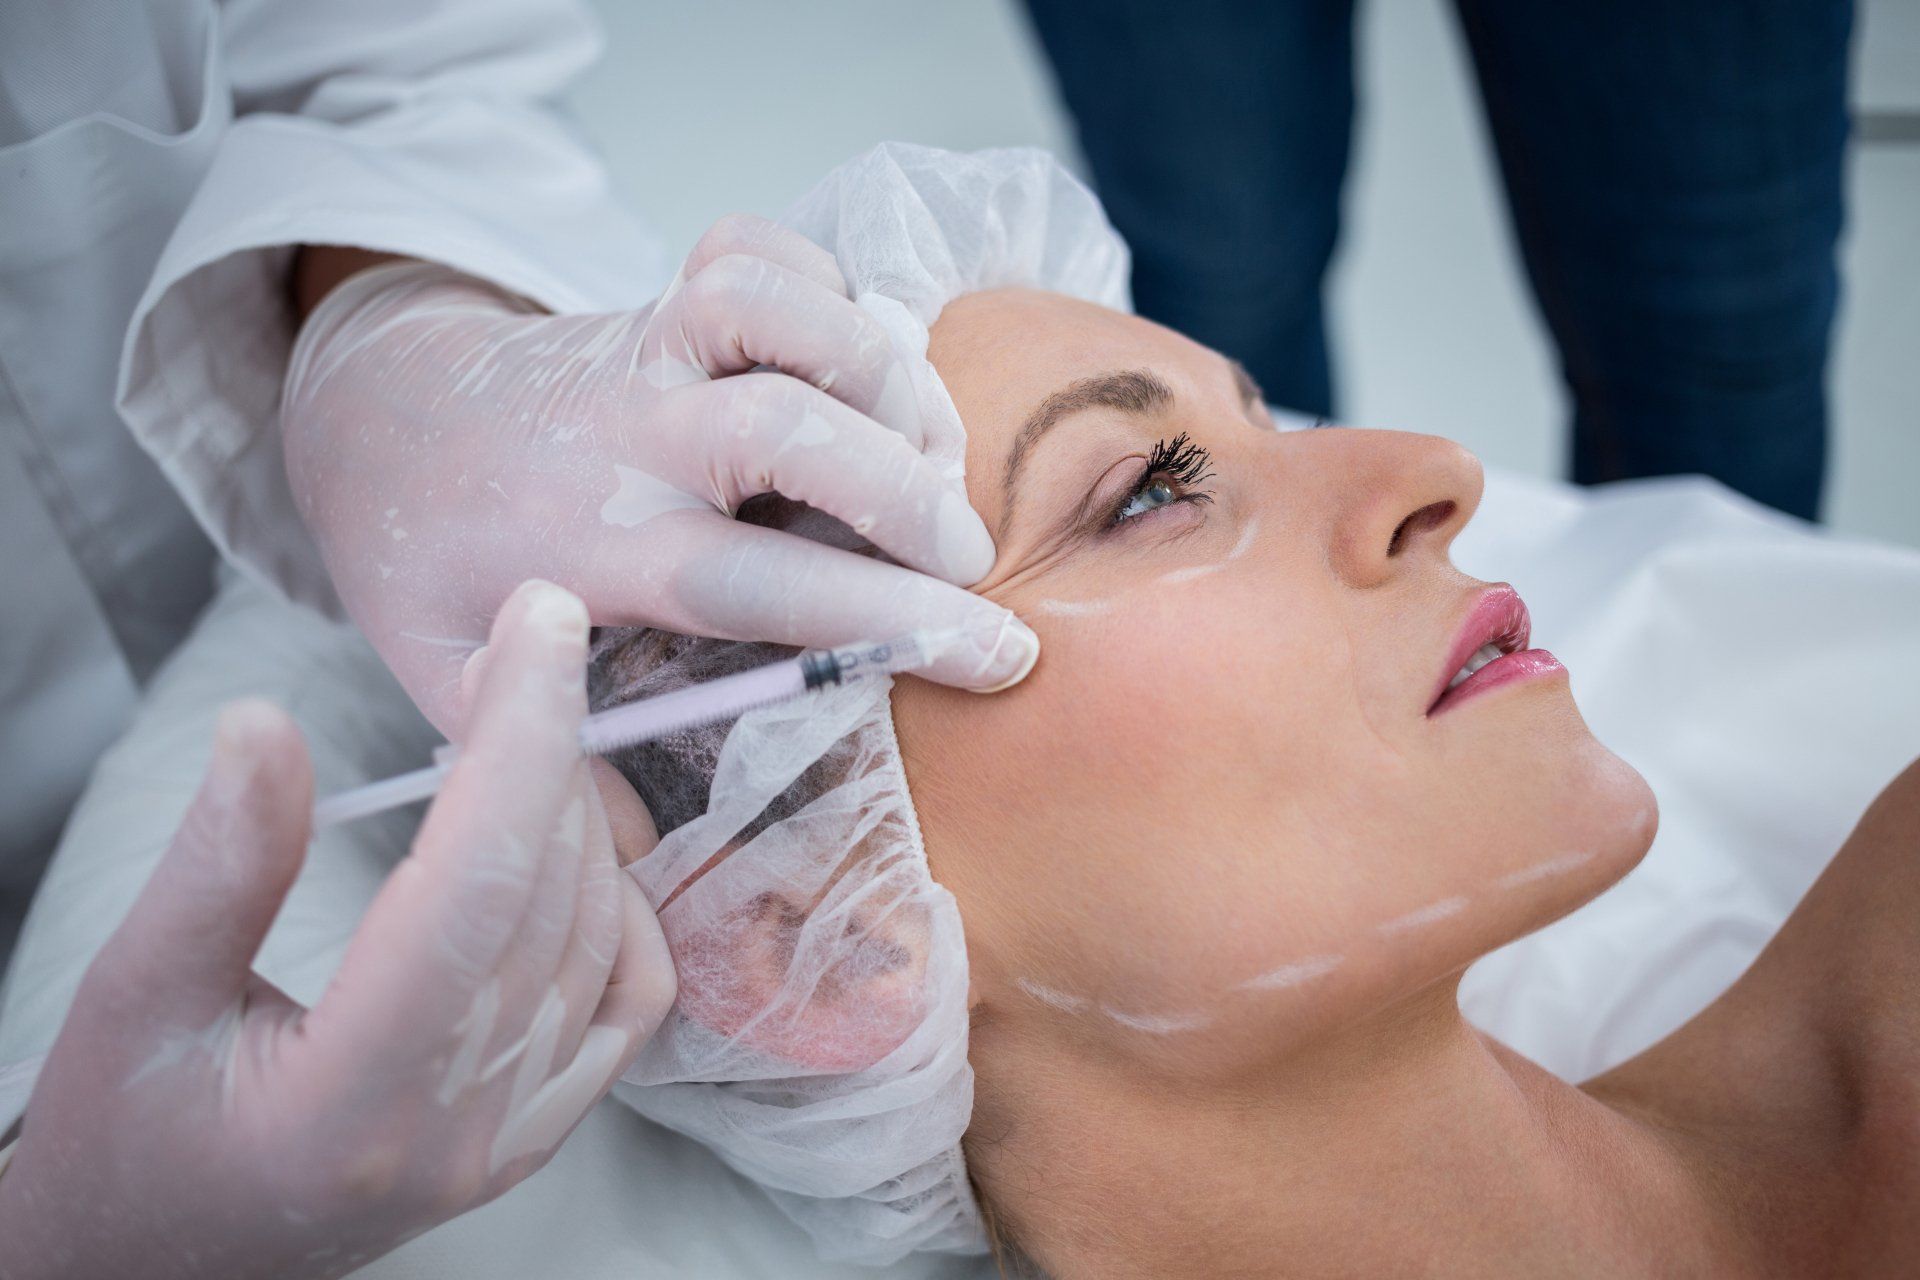 A woman is getting a botox injection in her face.